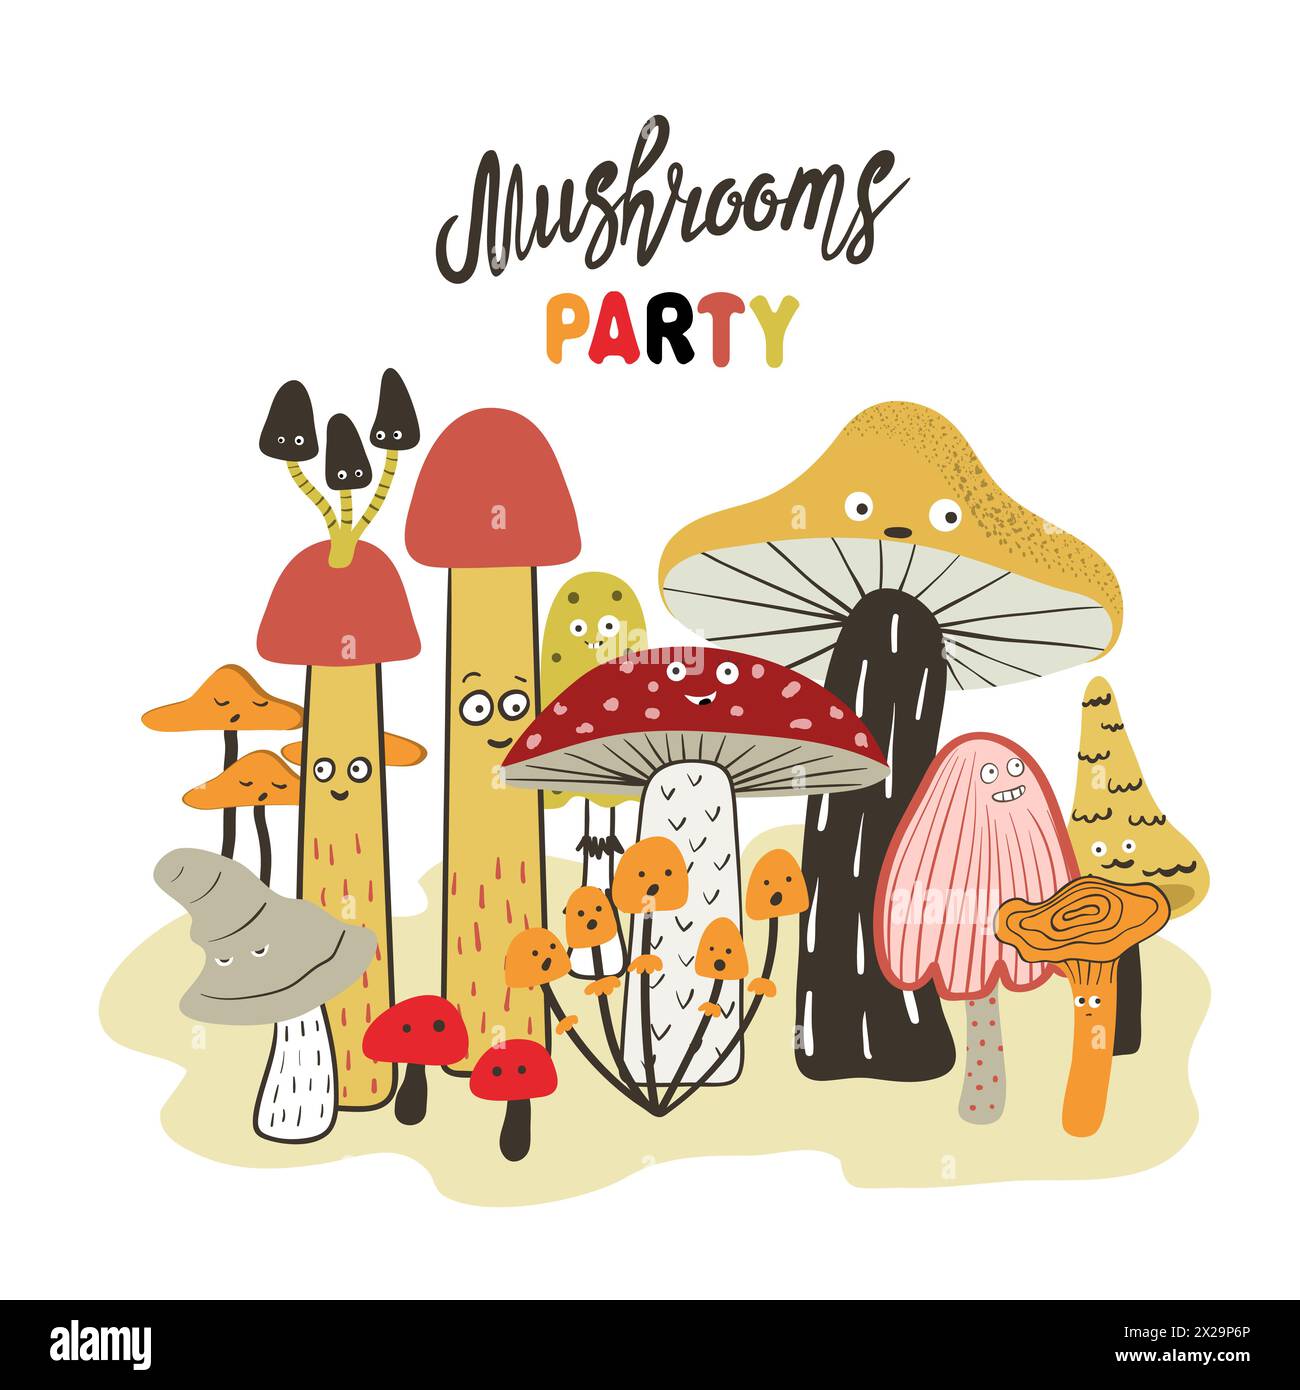 Cartoon mushroom set. Funny print. Mushrooms party poster with funny characters with eyes Stock Vector